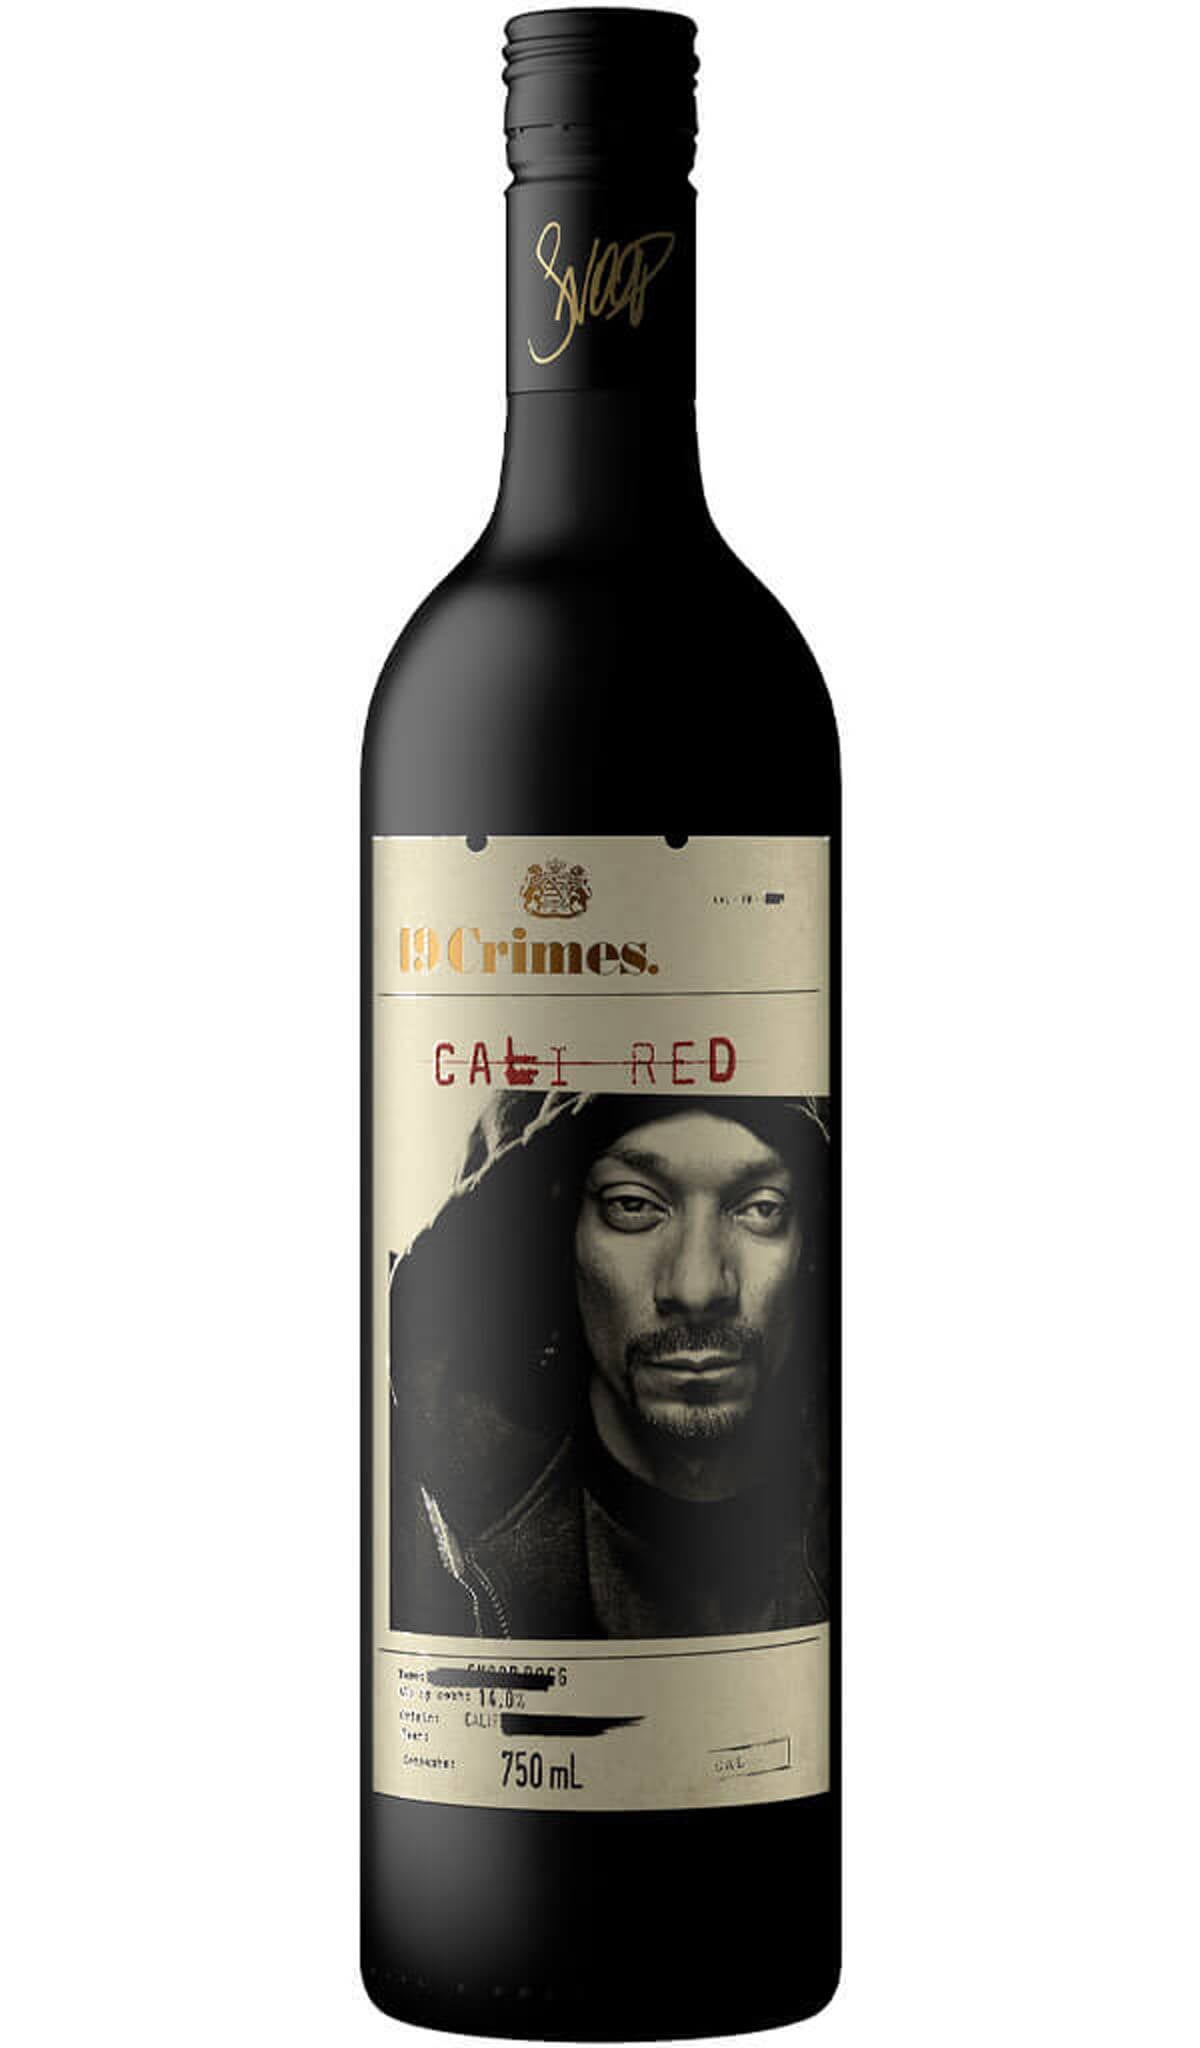 Find out more or buy 19 Crimes Snoop Dogg Cali Red 2021 online at Wine Sellers Direct - Australia’s independent liquor specialists.